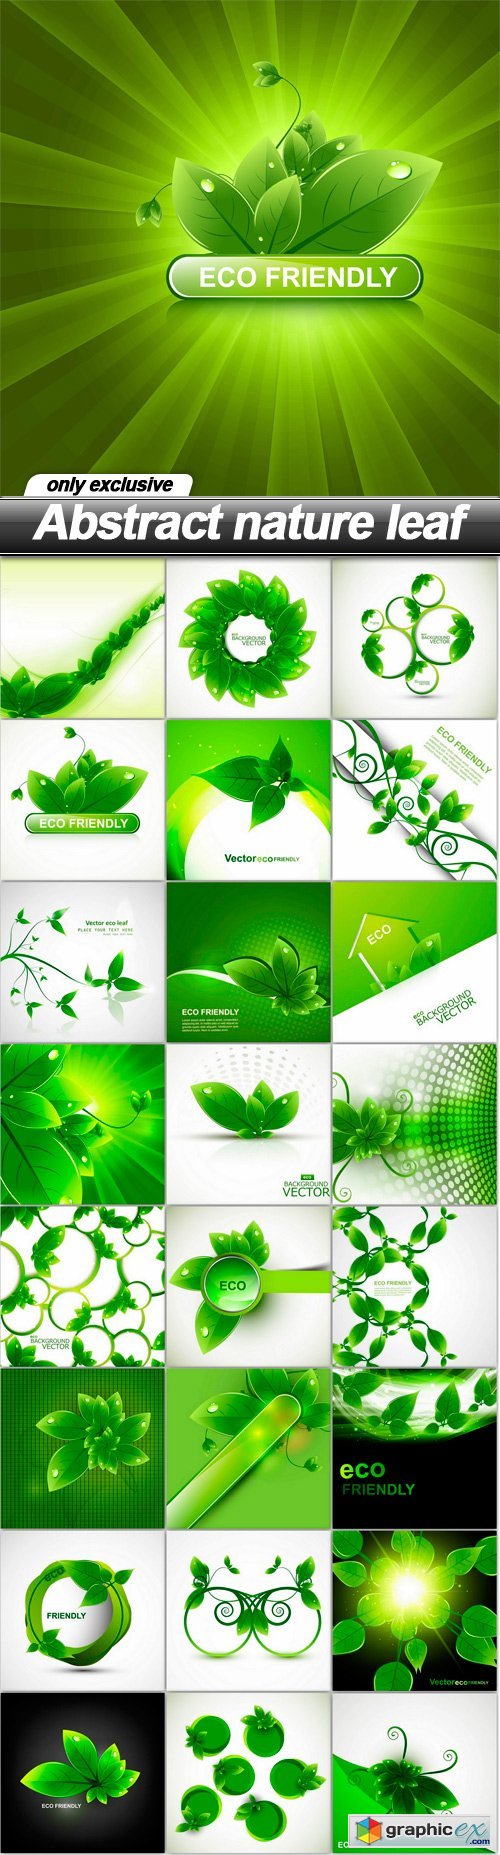 Abstract nature leaf - 25 EPS